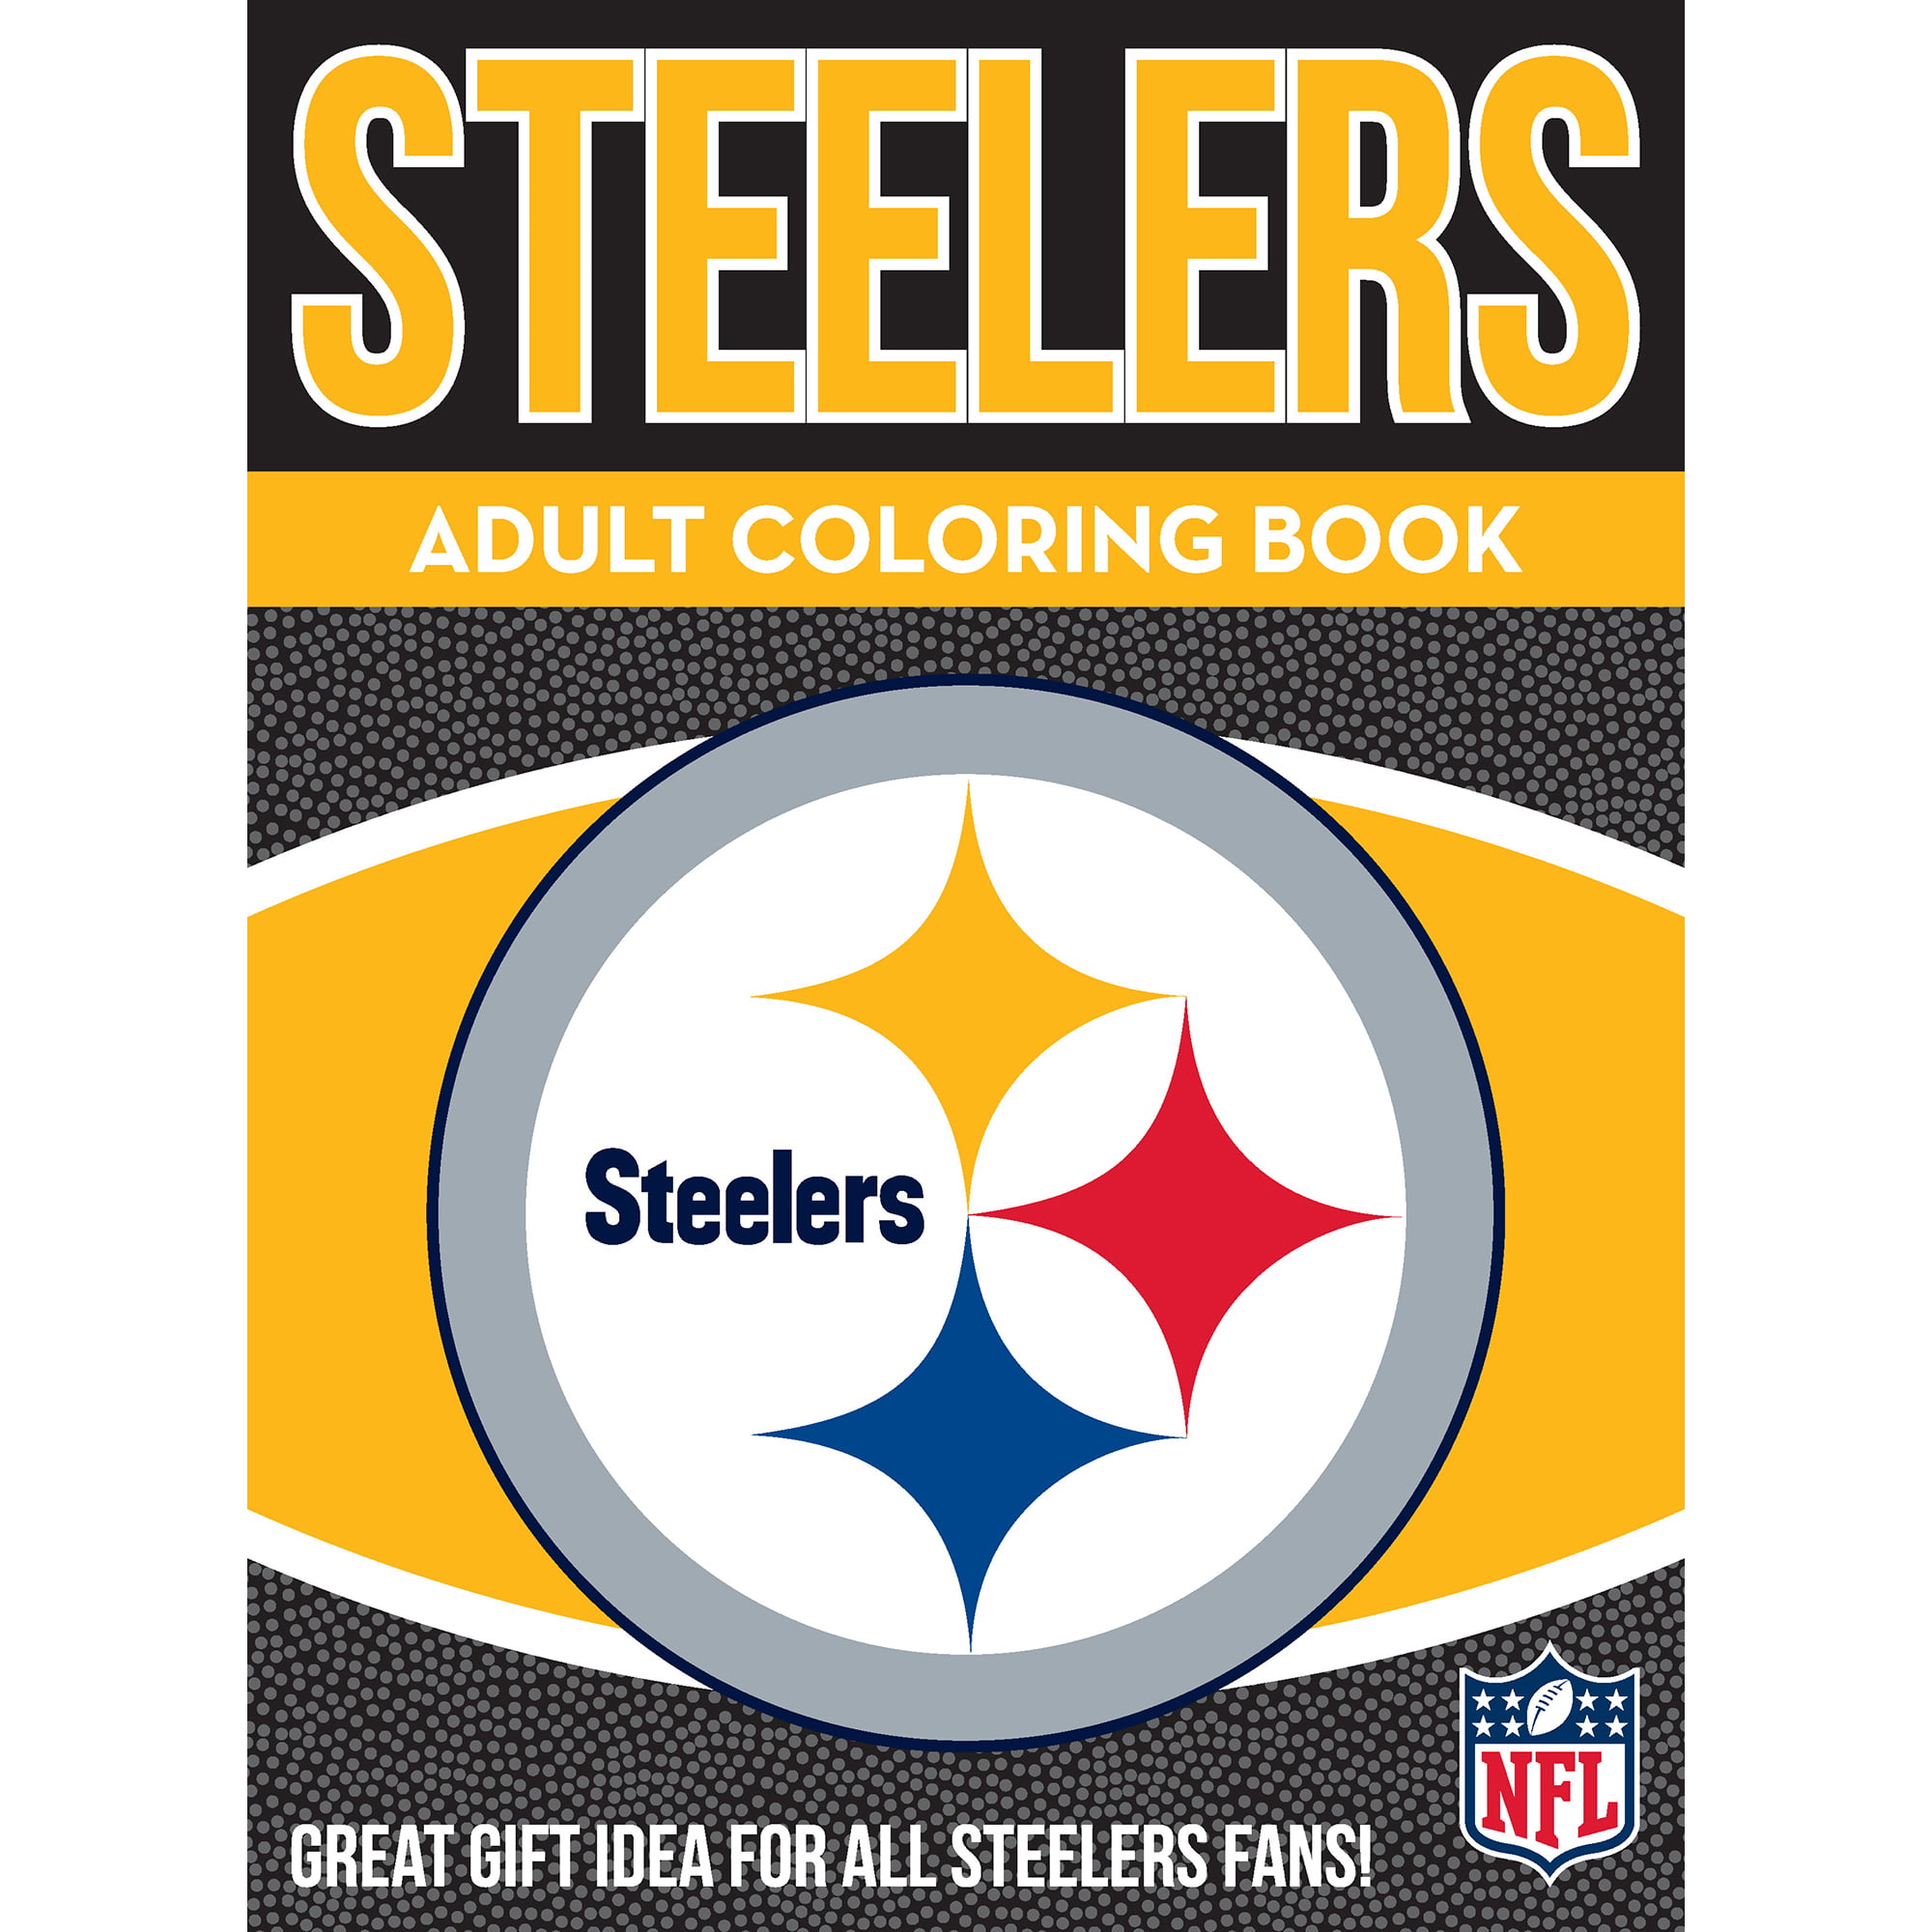 Download In the Sports Zone NFL Adult Coloring Book, Pittsburgh Steelers - Walmart.com - Walmart.com